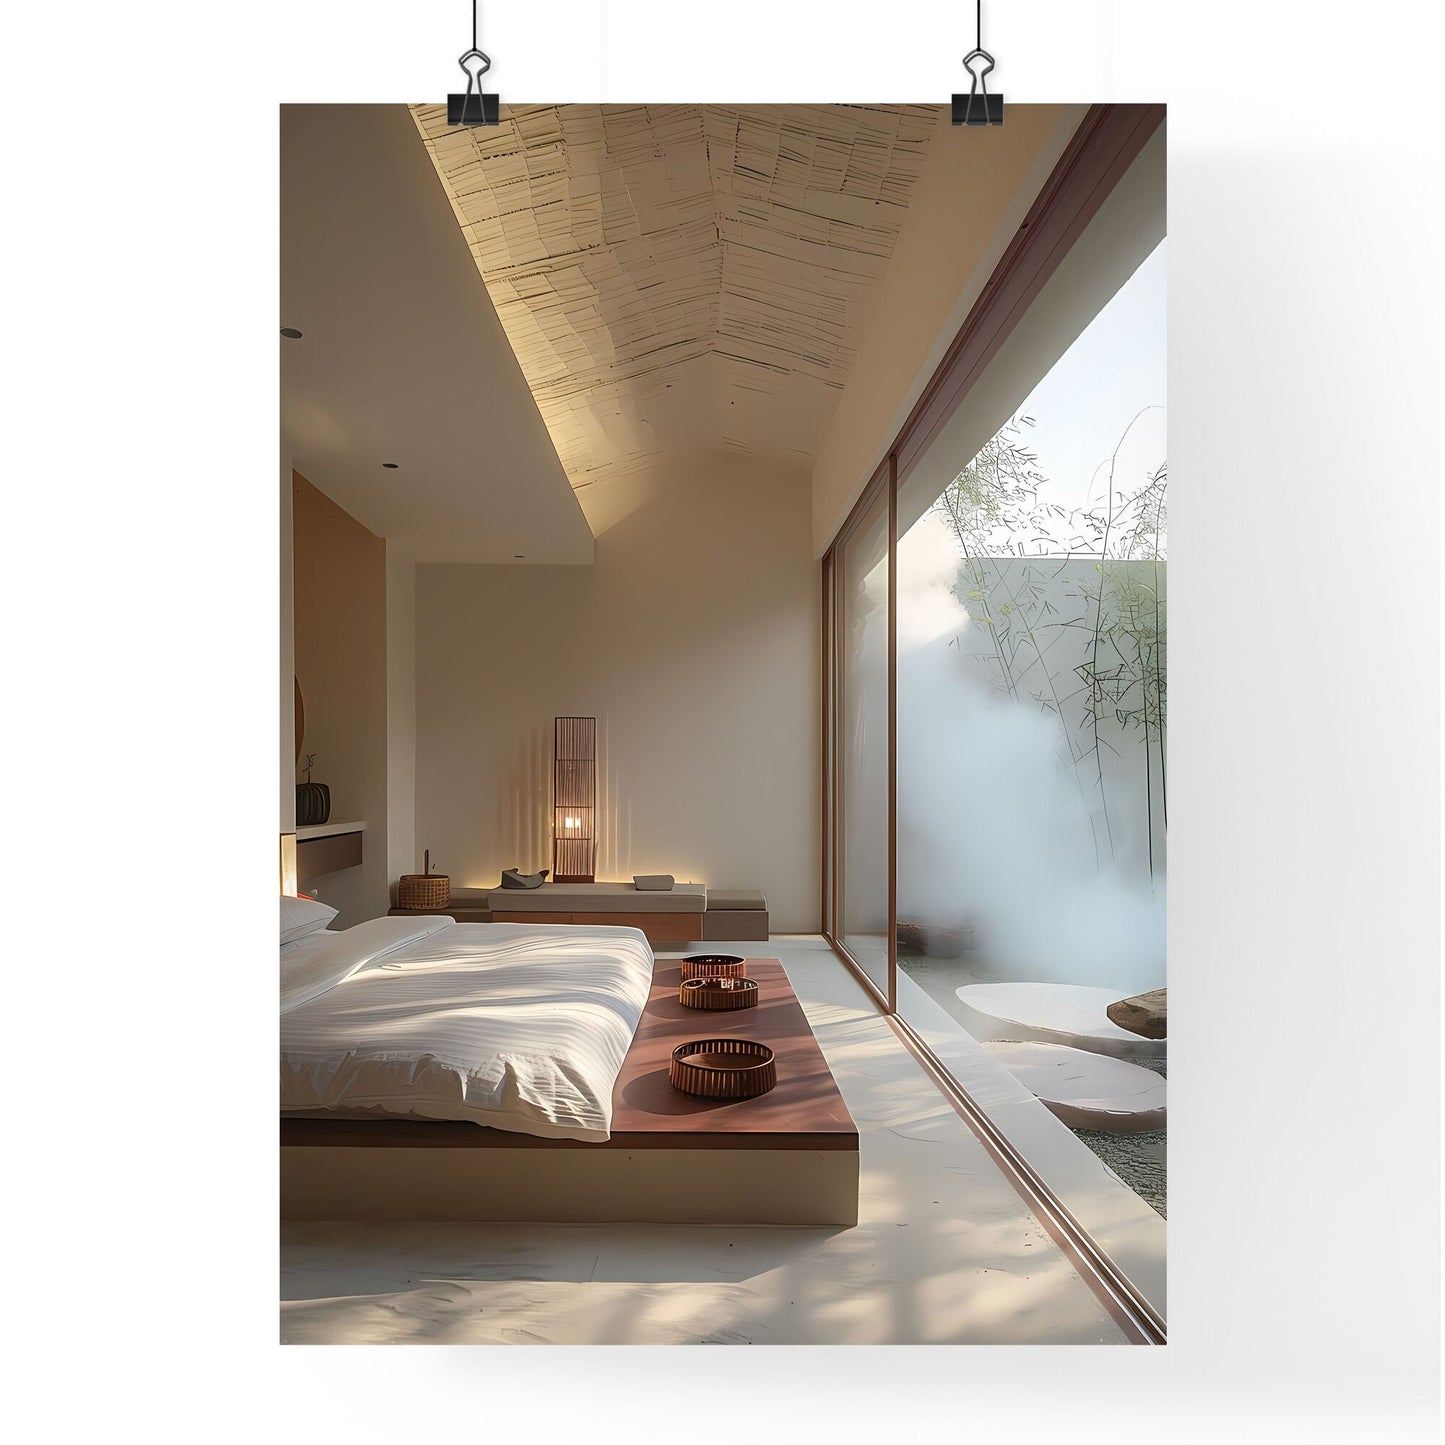 Modern B&B guest room with large window, vibrant painting, minimalist decor, white walls, undulating green grassy ground, stones, trees, white smoke, gray ground, sunlight projected through bamboo Default Title